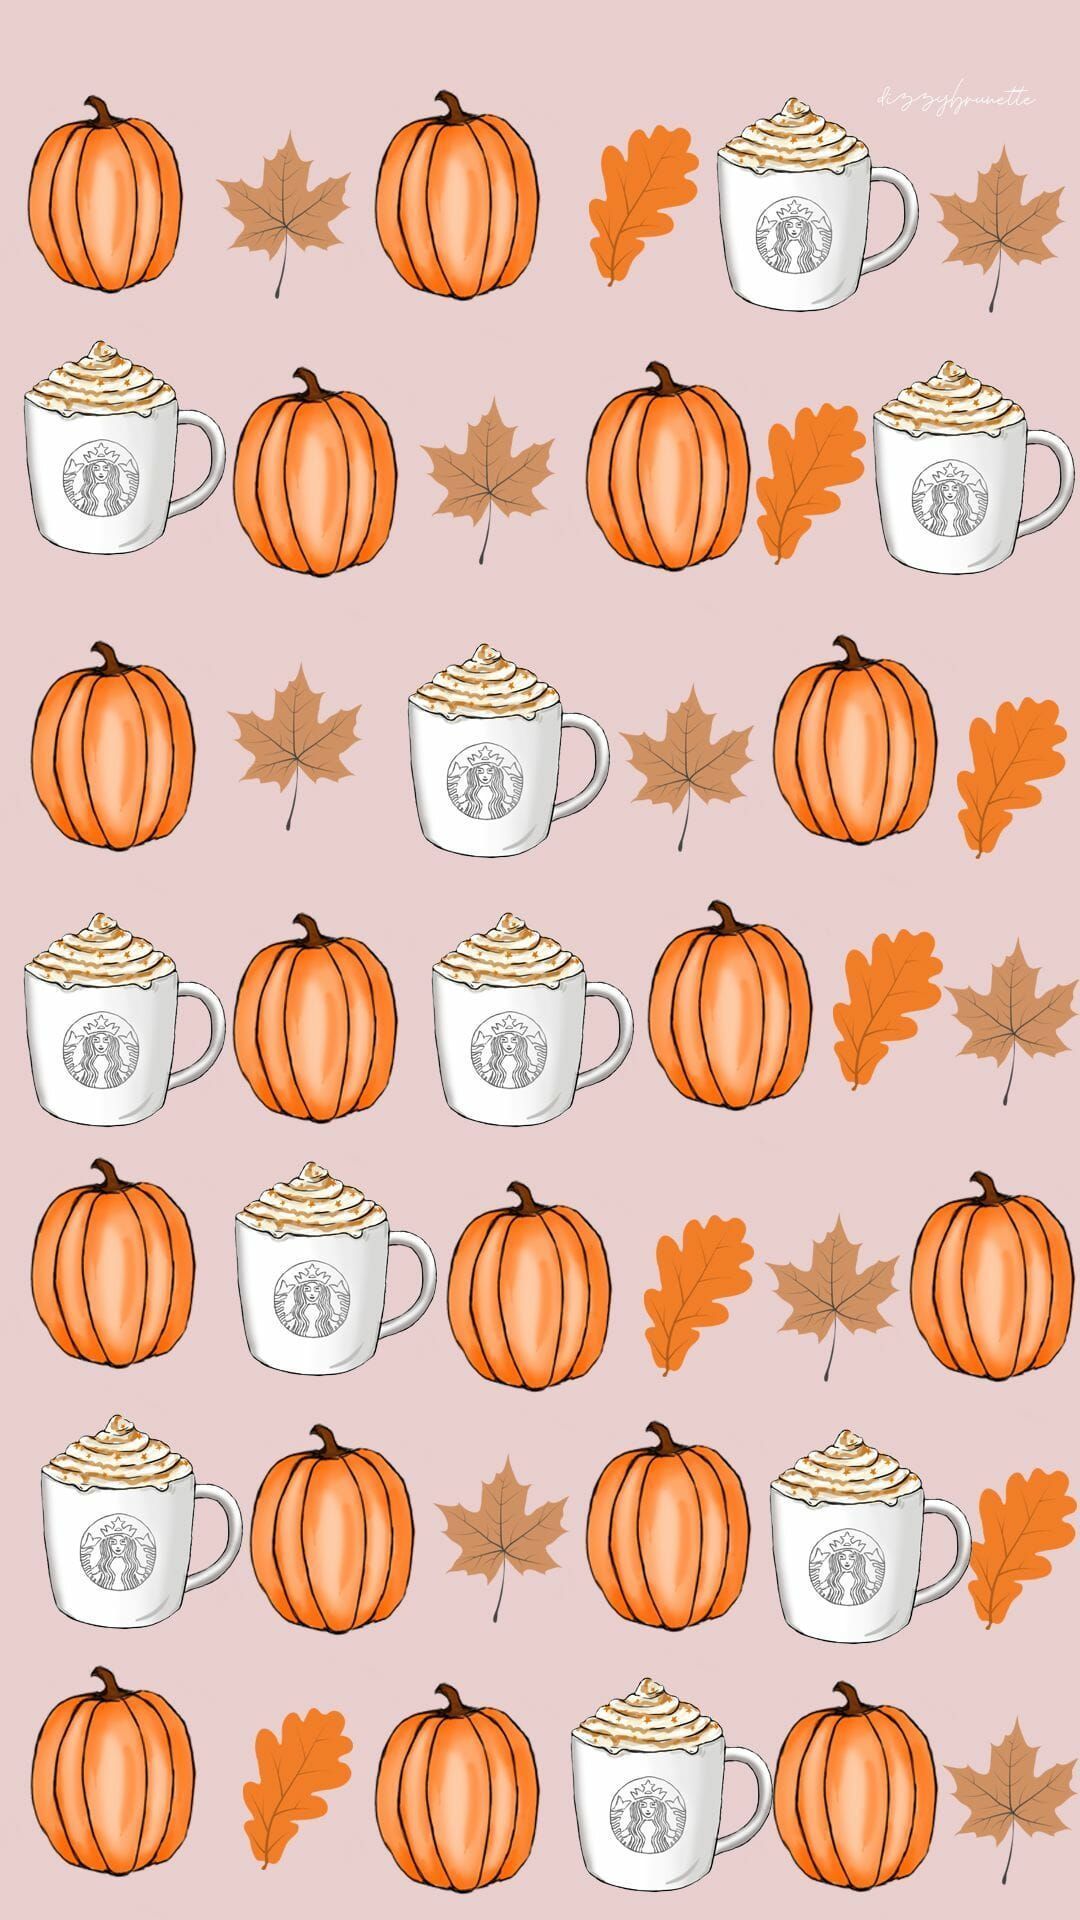 Free Amazing Fall Wallpaper For iPhone. iPhone wallpaper fall, Cute fall wallpaper, Fall wallpaper